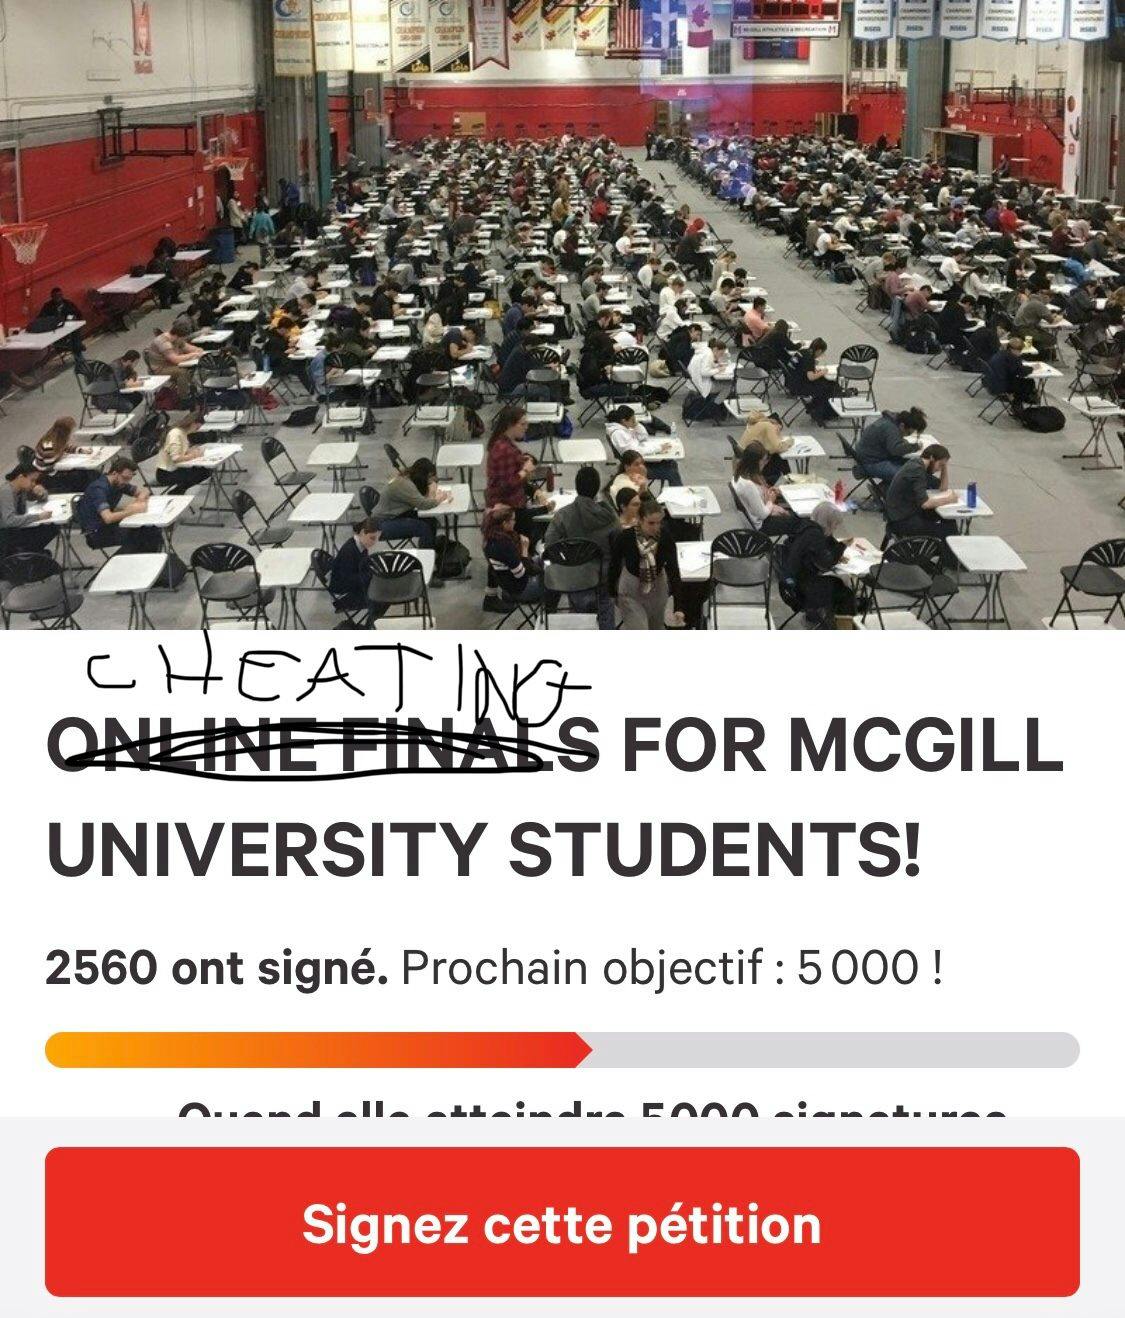 Wow, McGill kids cheat so much they even <a href="https://www.mcgillnightly.ca/articles/student-on-your-left-in-fieldhouse-majoring-in-coughing-apparently" target="_blank">stole their photo</a> from us! Source: The McGill Nightly’s photographers